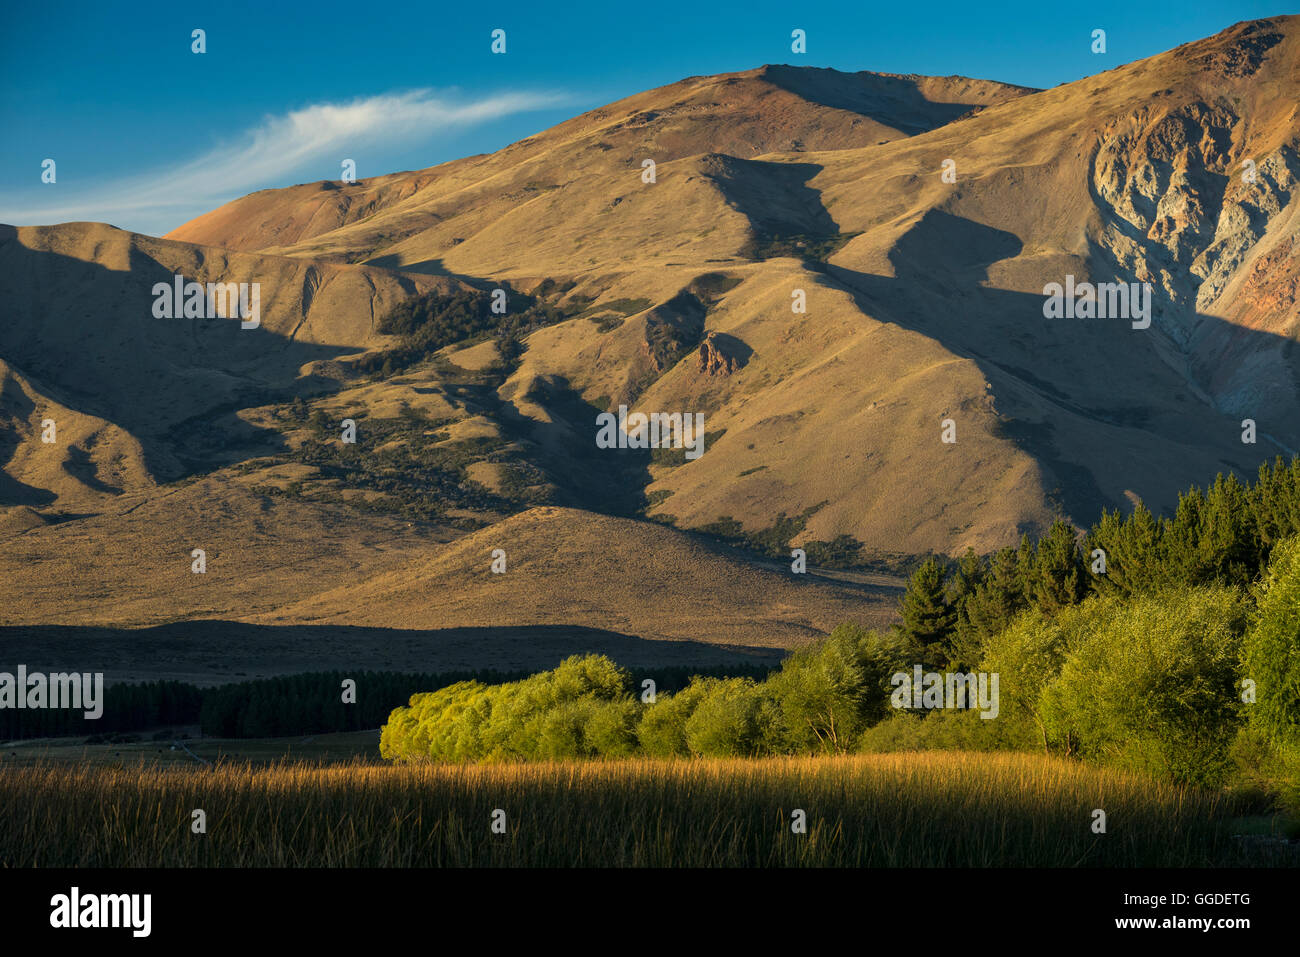 South America, Argentina, Patagonia, Chubut, Esquel, Andes mountains Stock Photo